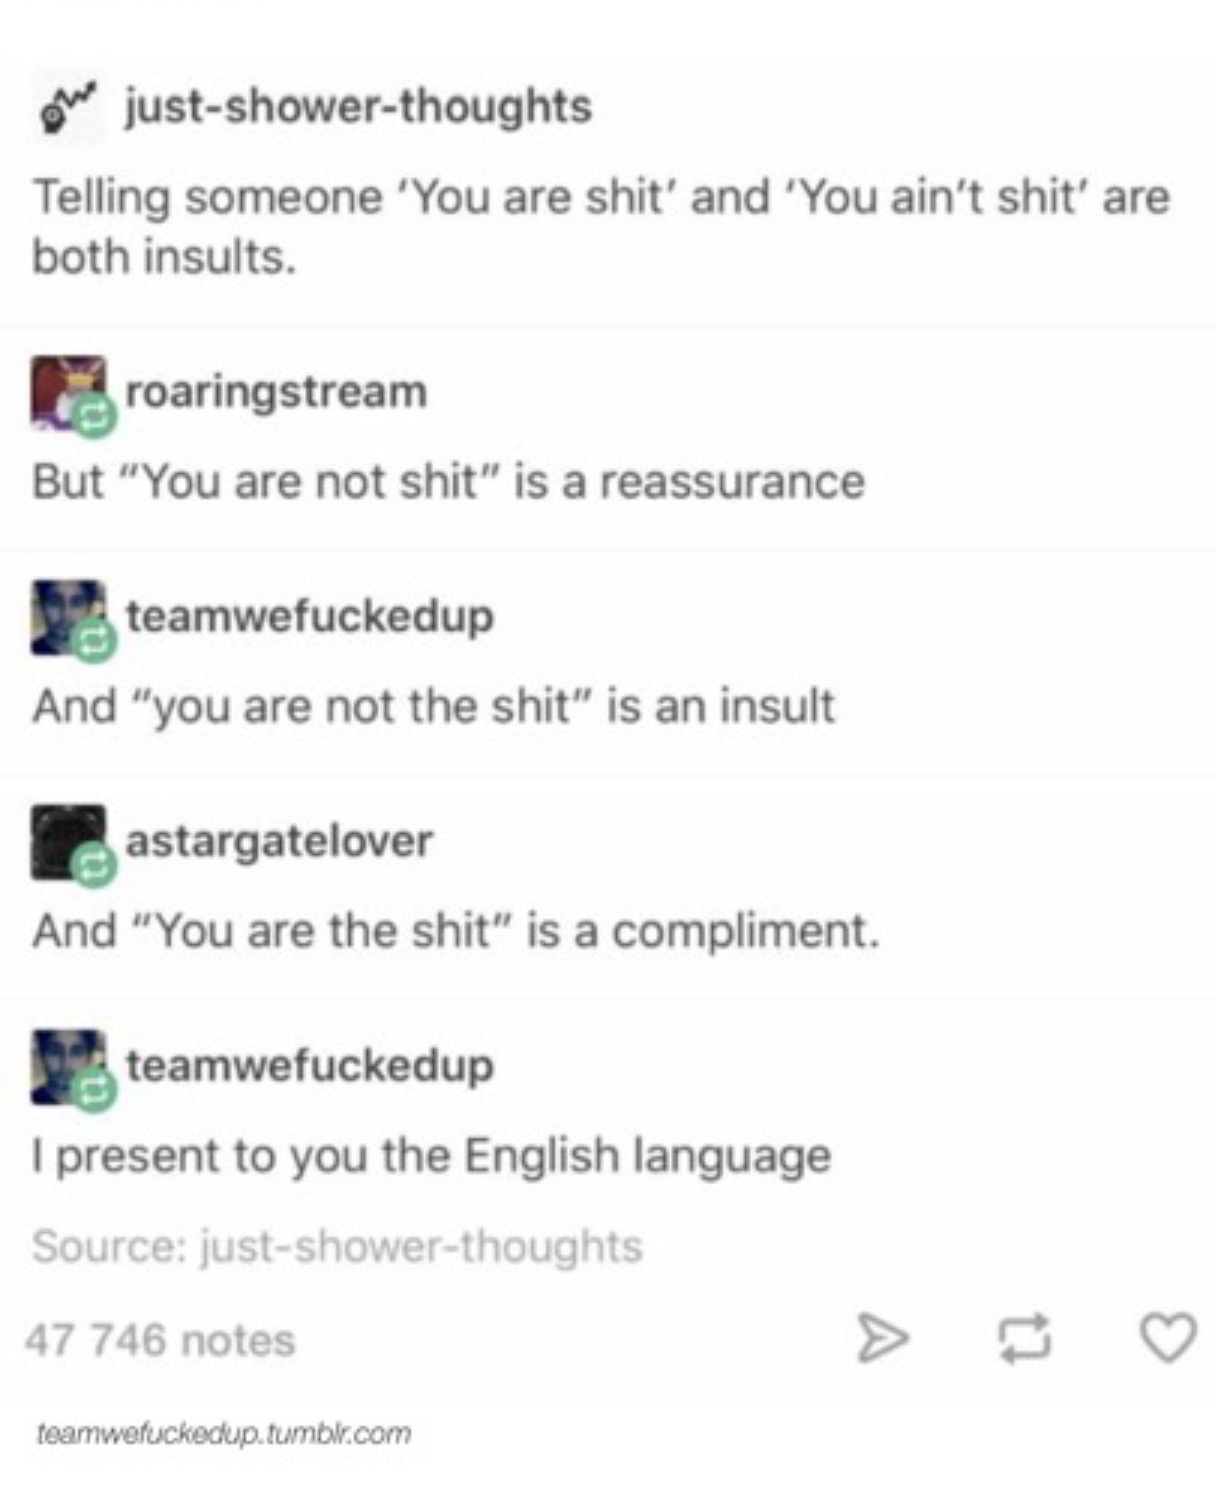 diagram - one justshowerthoughts Telling someone 'You are shit' and 'You ain't shit' are both insults. roaringstream But "You are not shit" is a reassurance teamwefuckedup And "you are not the shit" is an insult astargatelover And "You are the shit" is a 